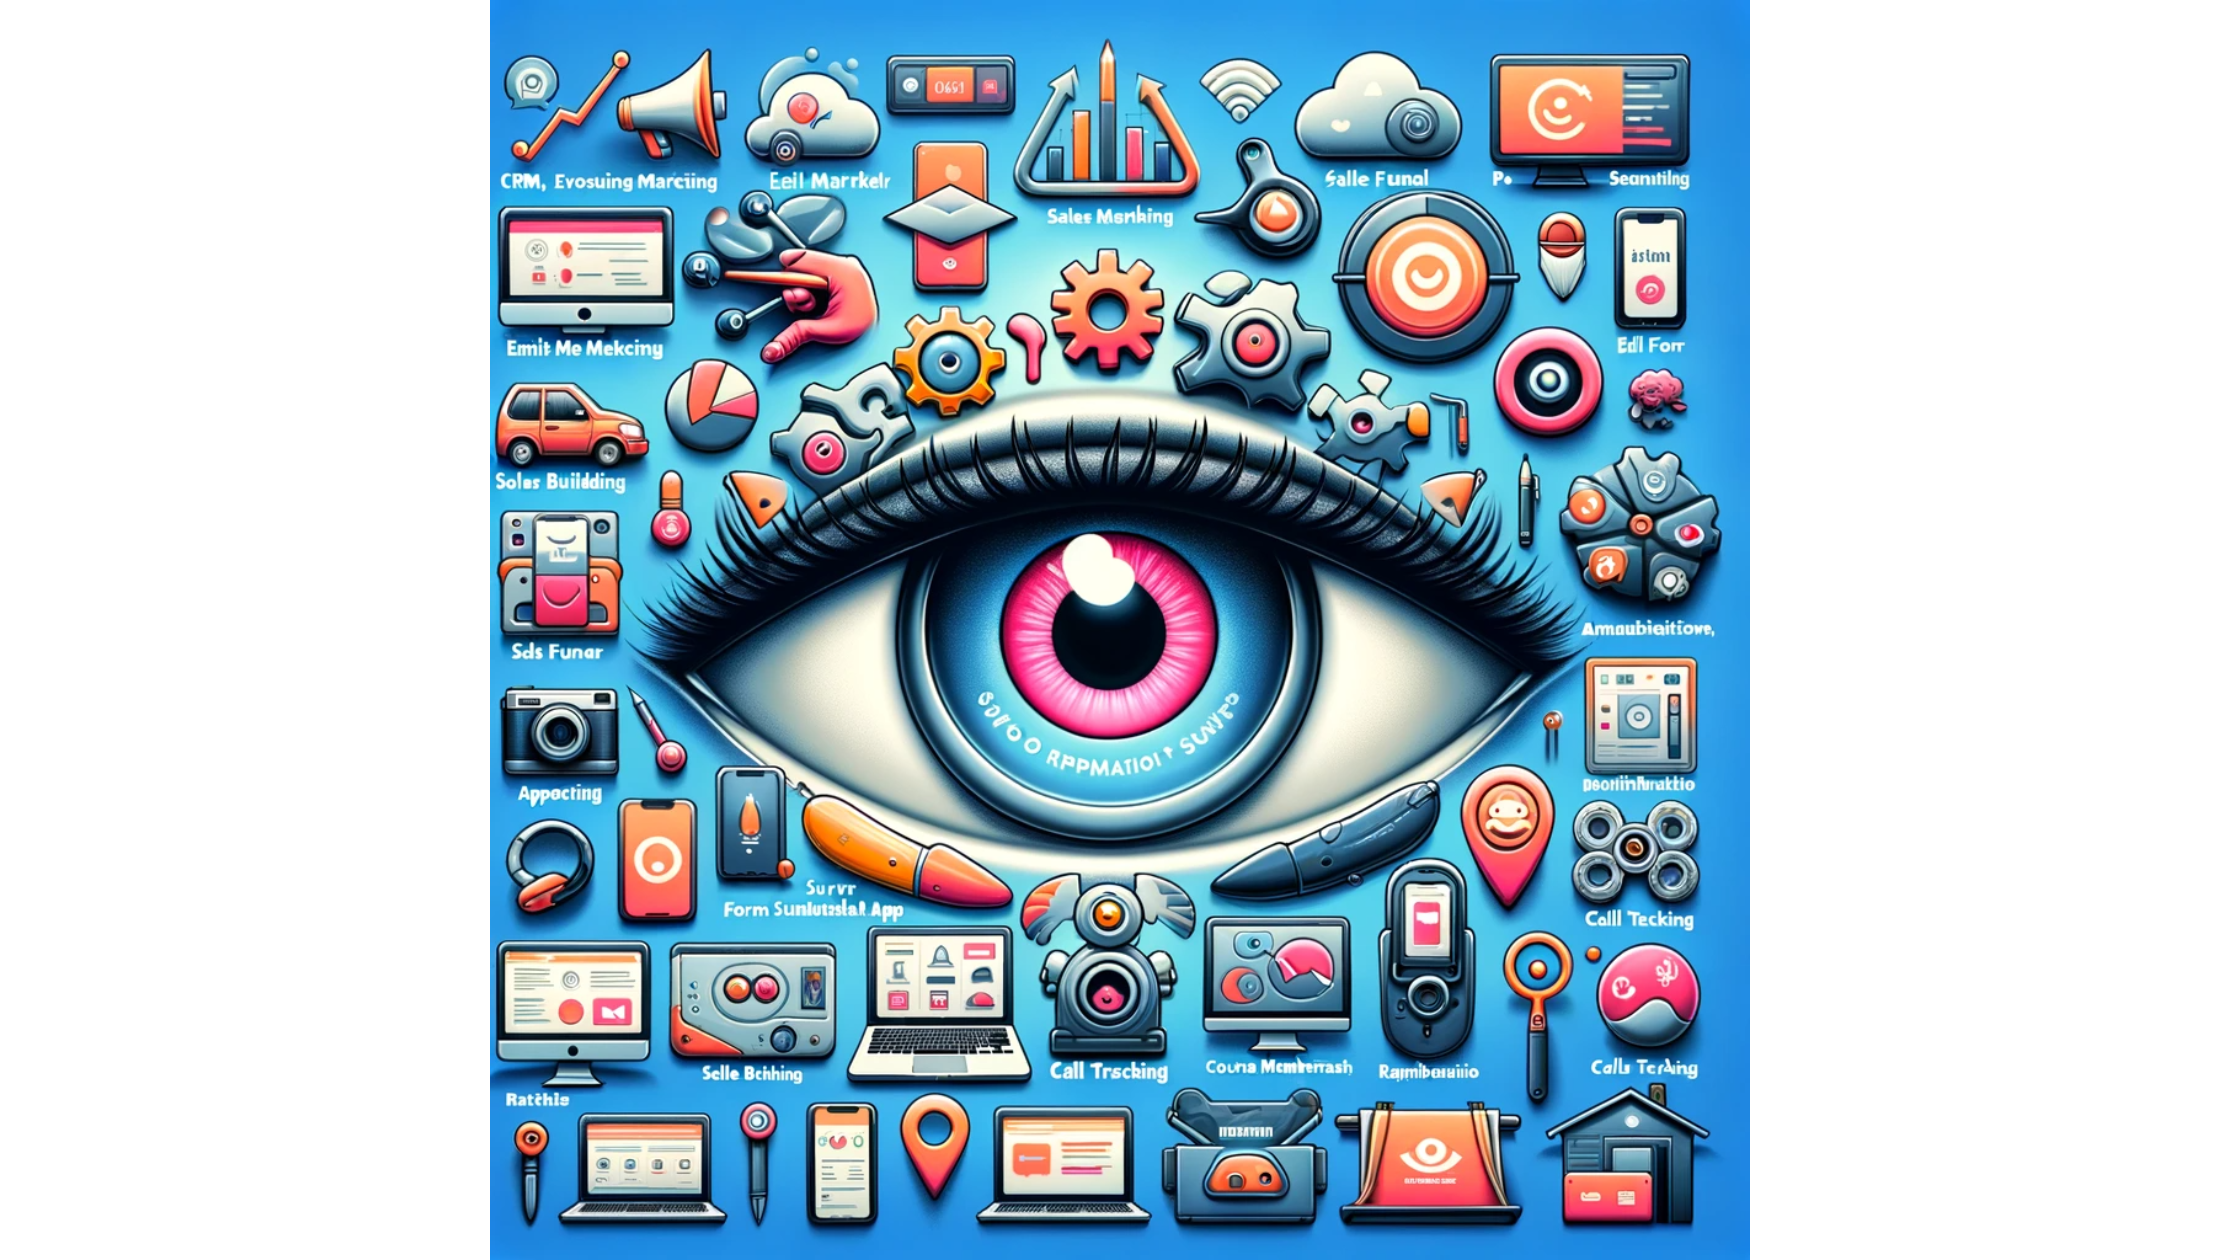 image of a human eye looking at what may be challanging to automate